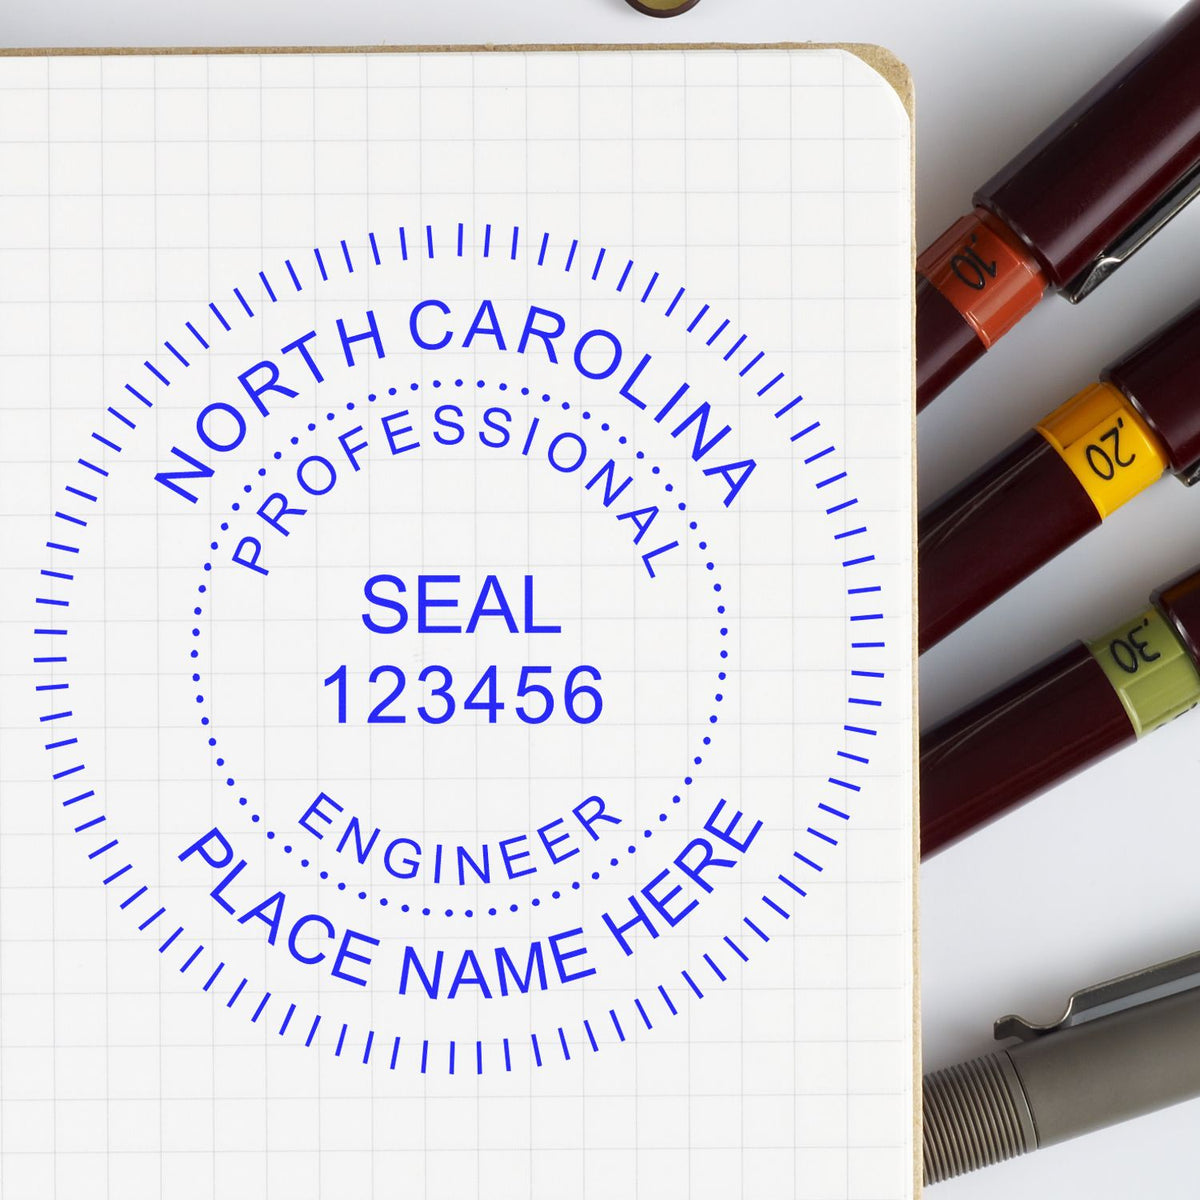 An alternative view of the North Carolina Professional Engineer Seal Stamp stamped on a sheet of paper showing the image in use